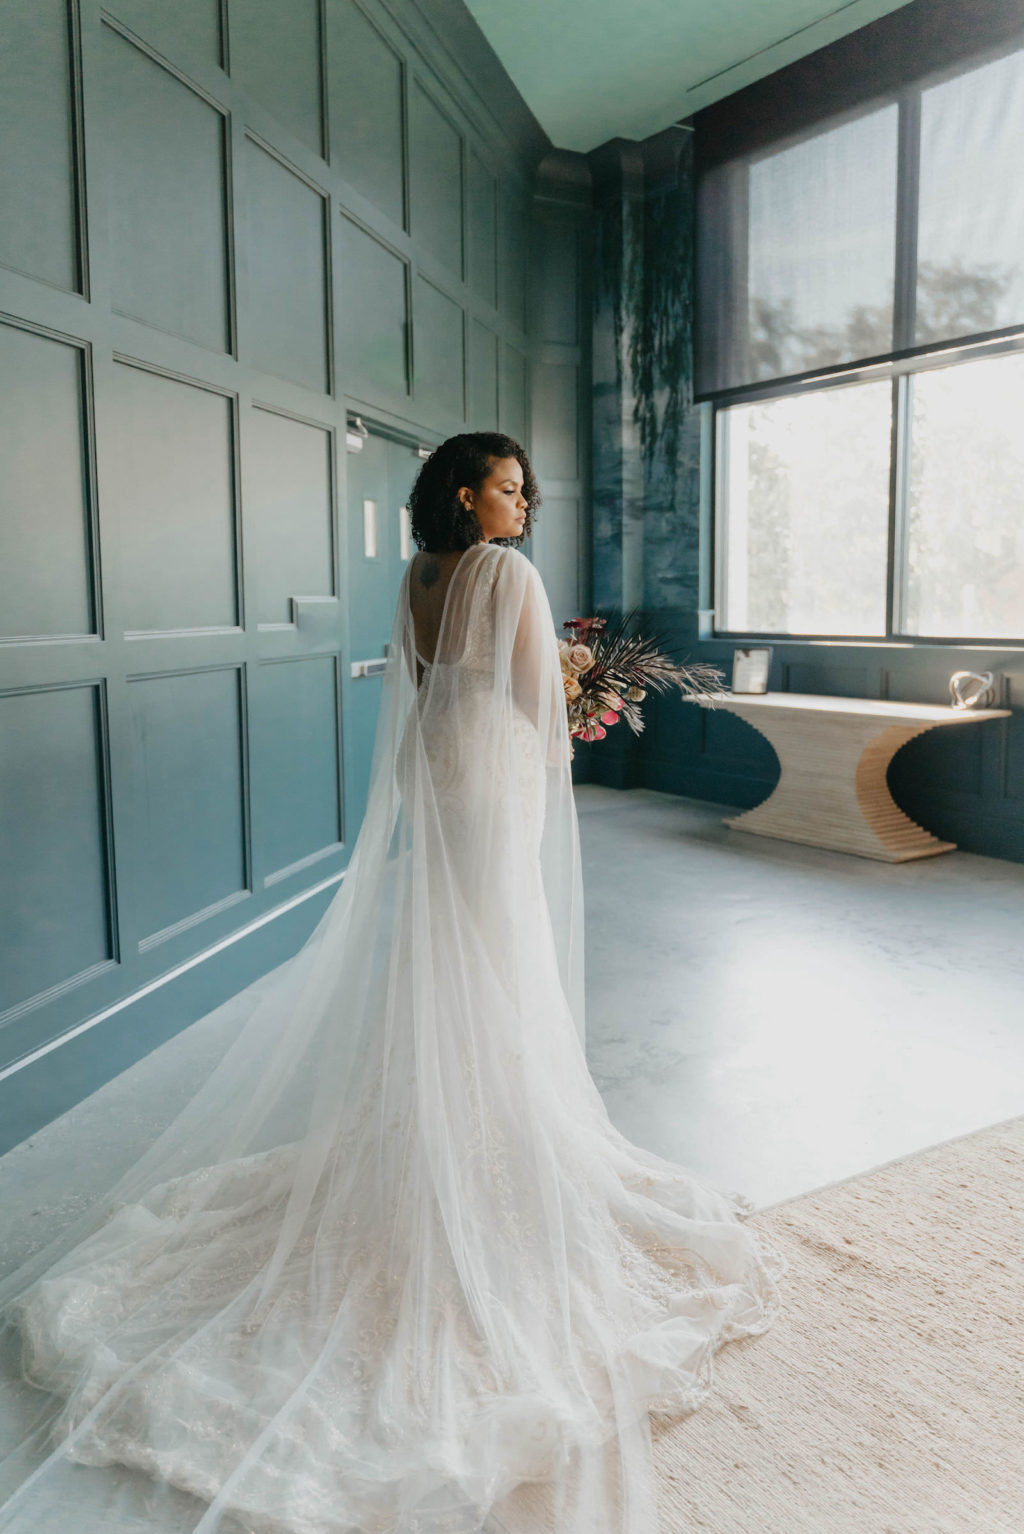 Indoor Bridal Portrait in Tampa Wedding Venue Hyde House | Illusion Lace Embroidered Beaded V Neck Wedding Dress Bridal Gown with Sheer Tulle Cape Sleeves by Designer Amalia Carrara Bridal